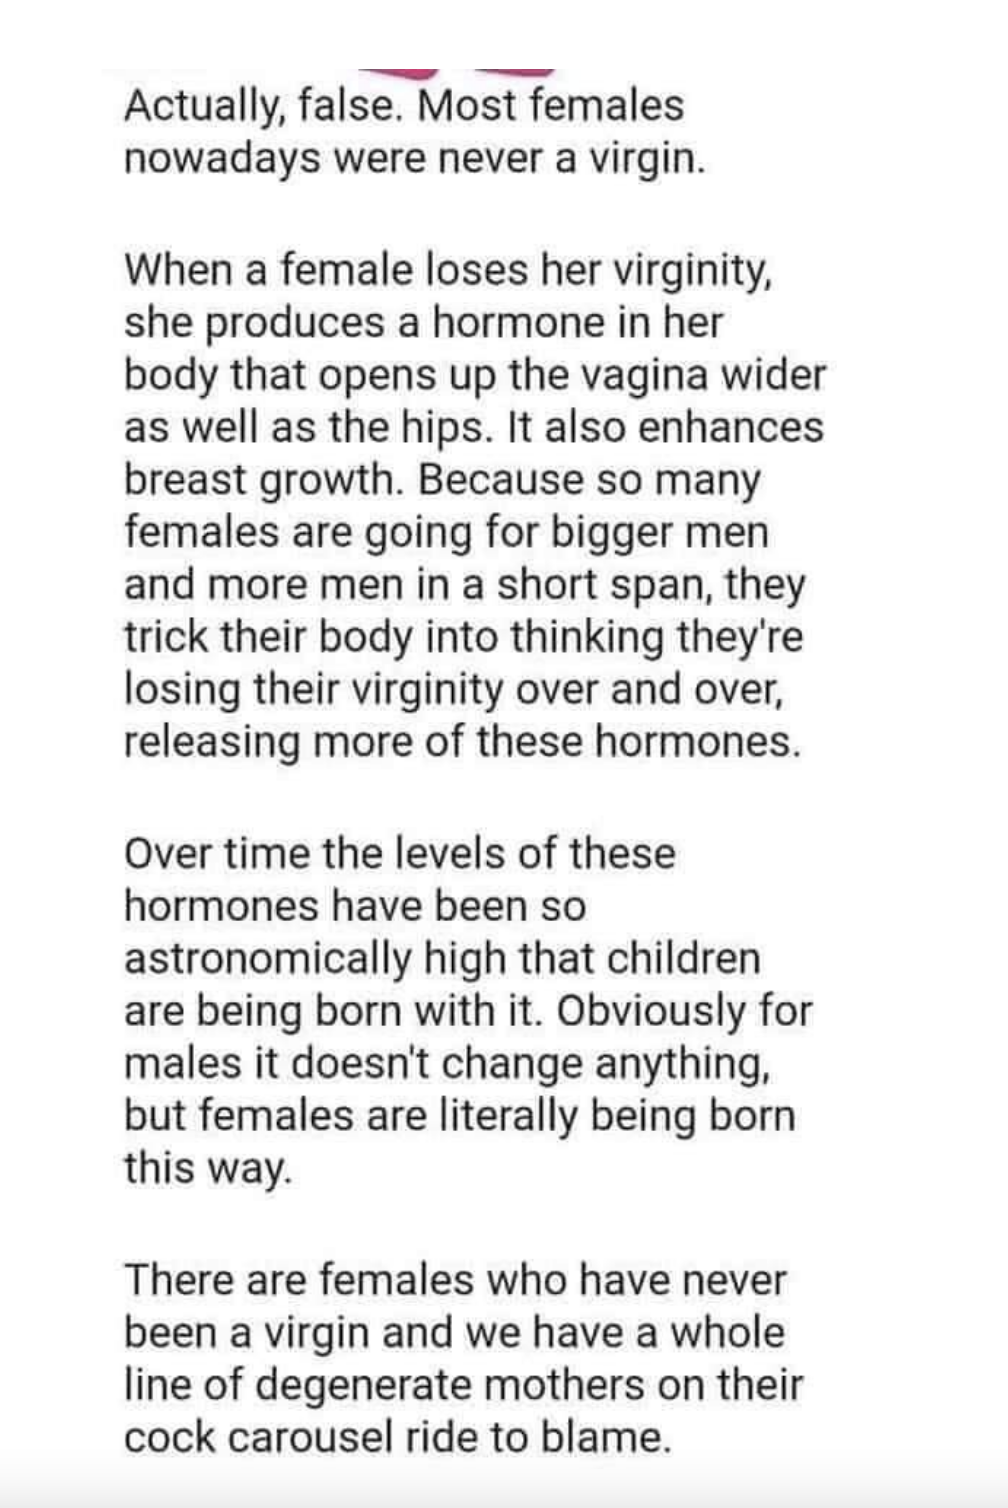 &quot;When a female loses her virginity, she produces a hormone that opens the vagina,&quot; and because women go with bigger and more men, their bodies think they&#x27;re losing their virginity repeatedly, so girls are being born with extra hormones and aren&#x27;t virgins